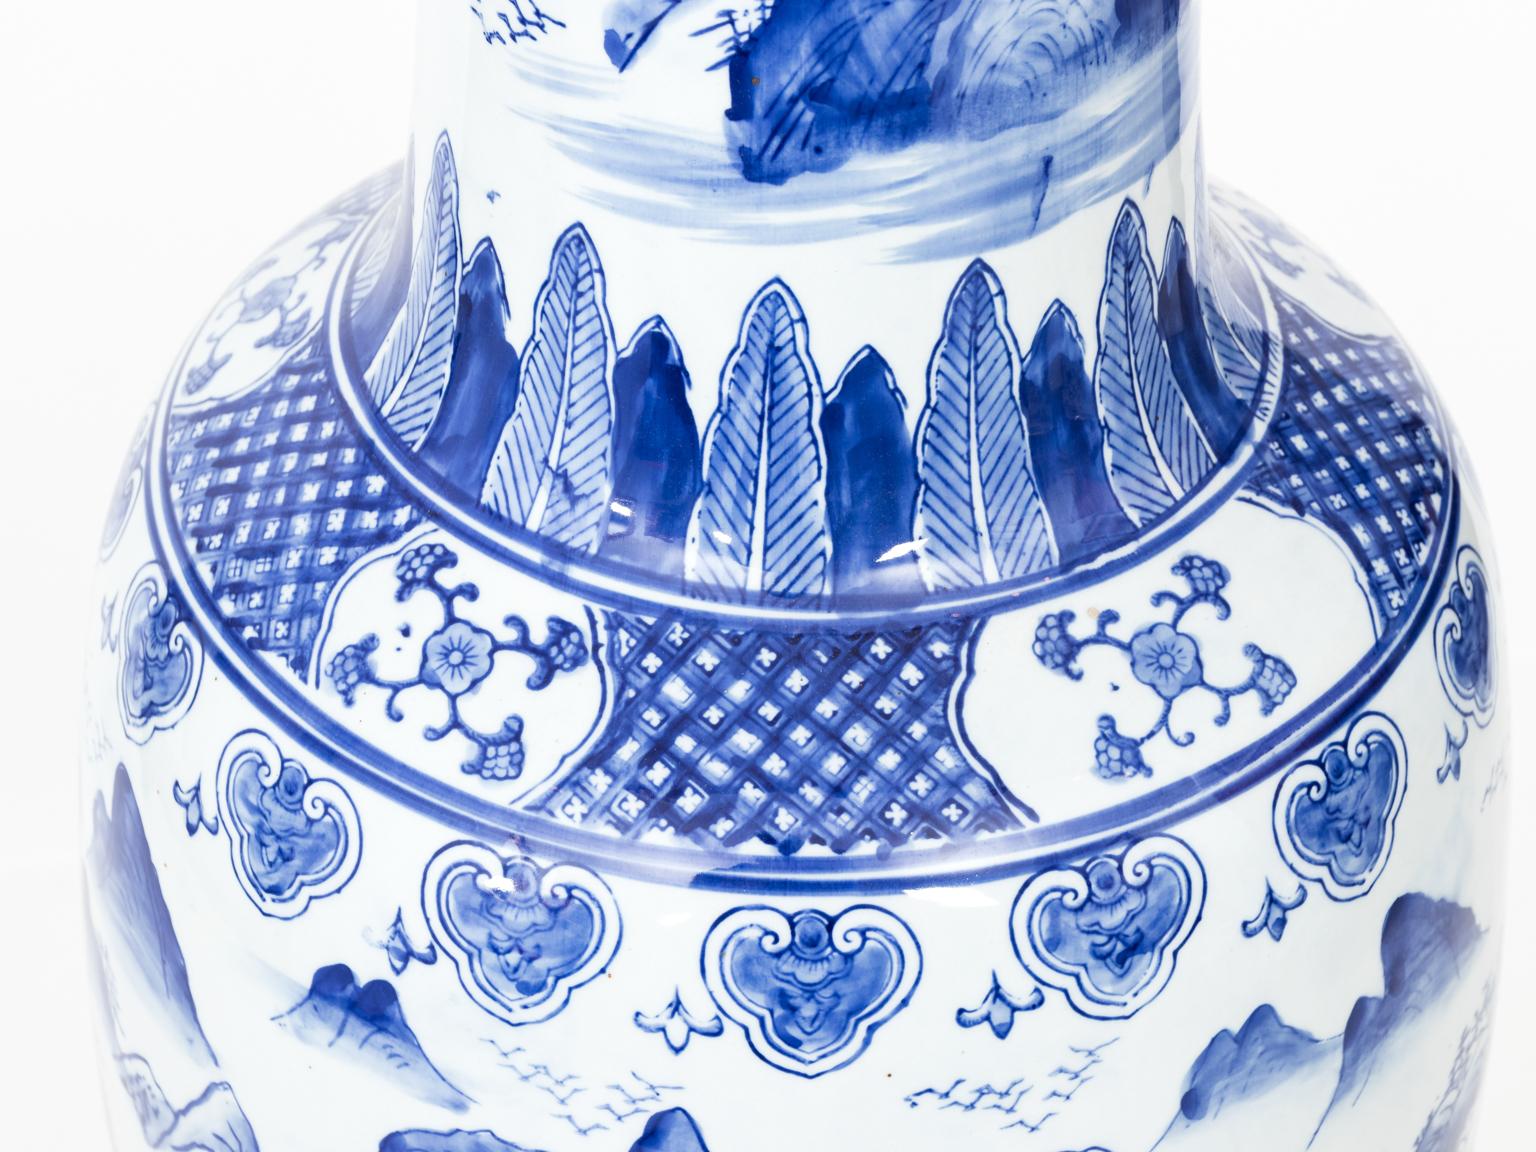 Large blue and white porcelain palace vase with scalloped edge and Chinese landscape scene on the body, circa 20th century.